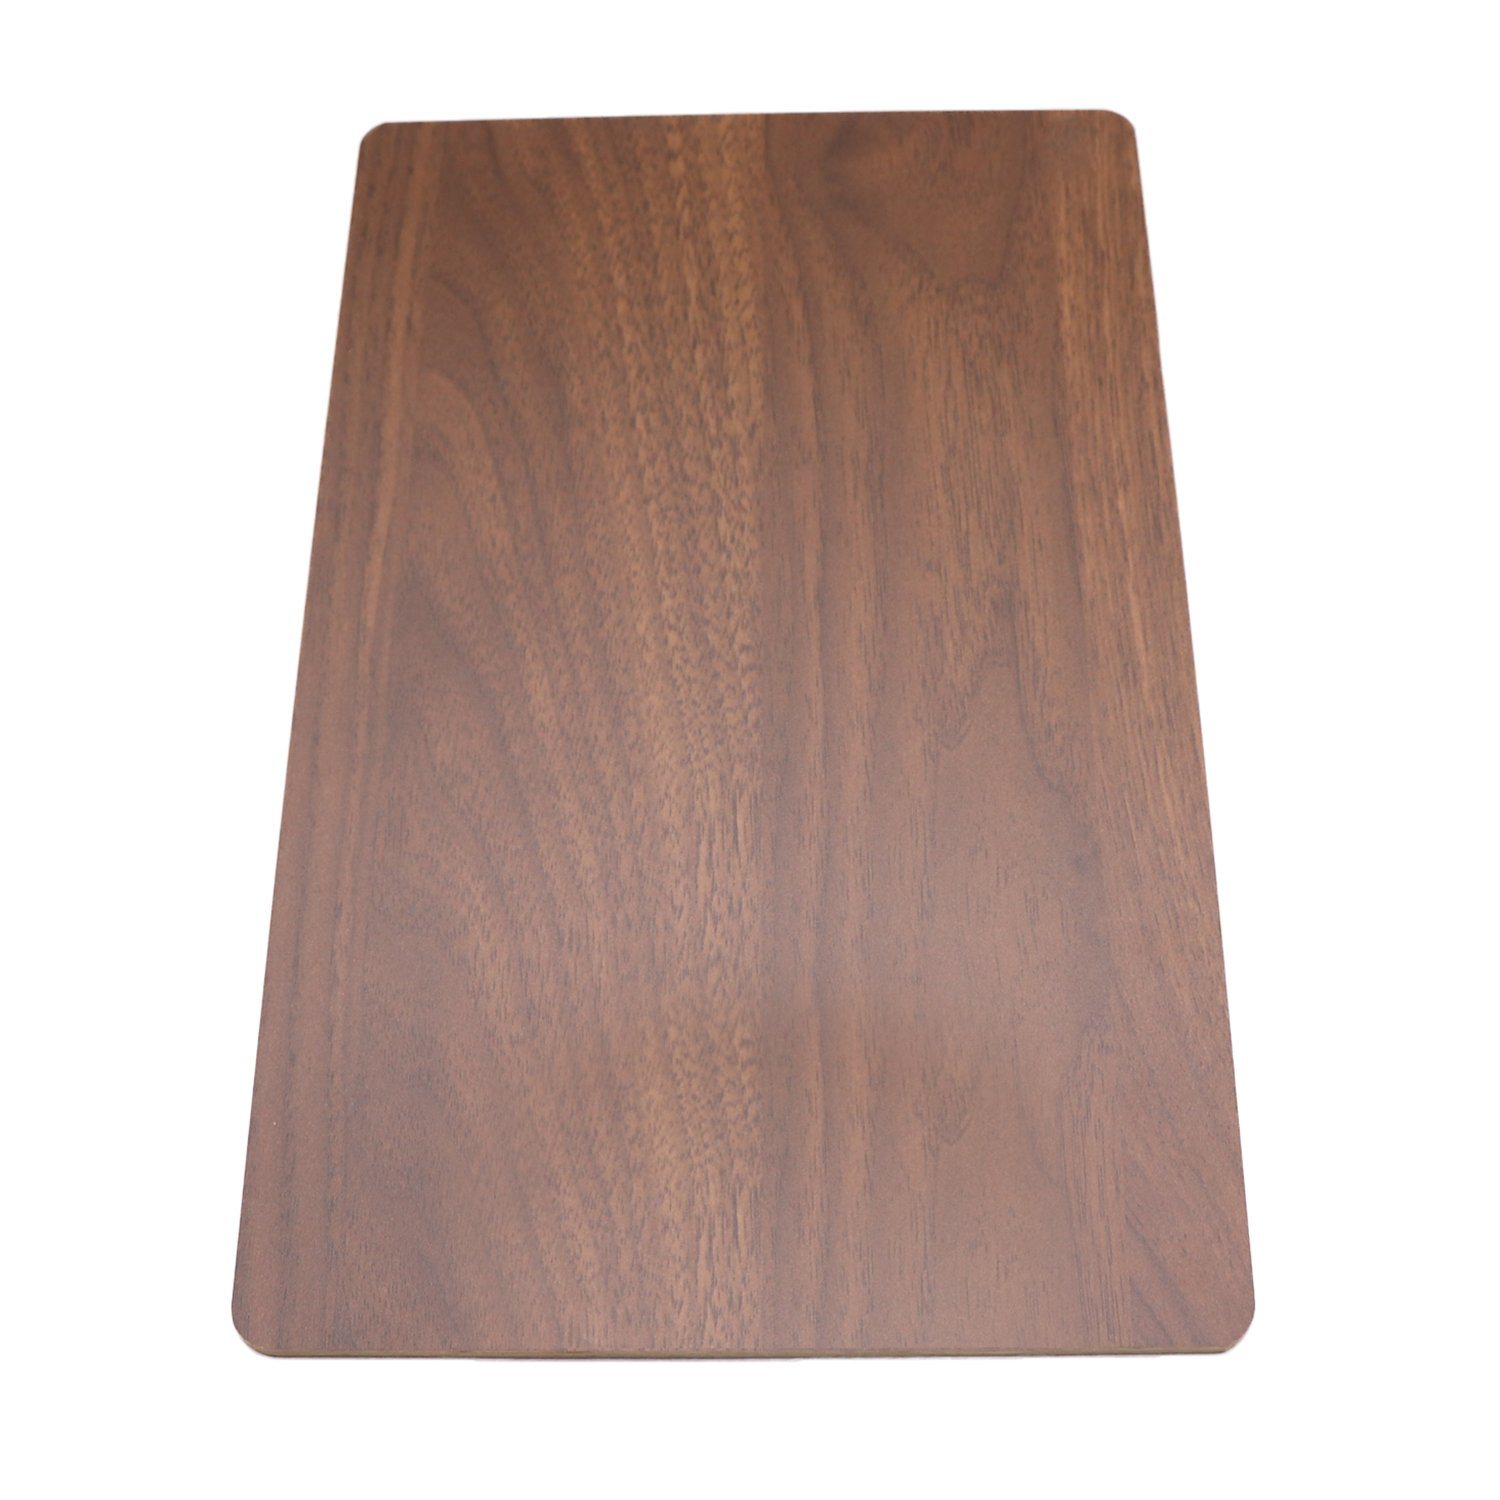 Multi Woodgrain Melamine Paper Faced Plywood 18mm Plywood Board for Decoration